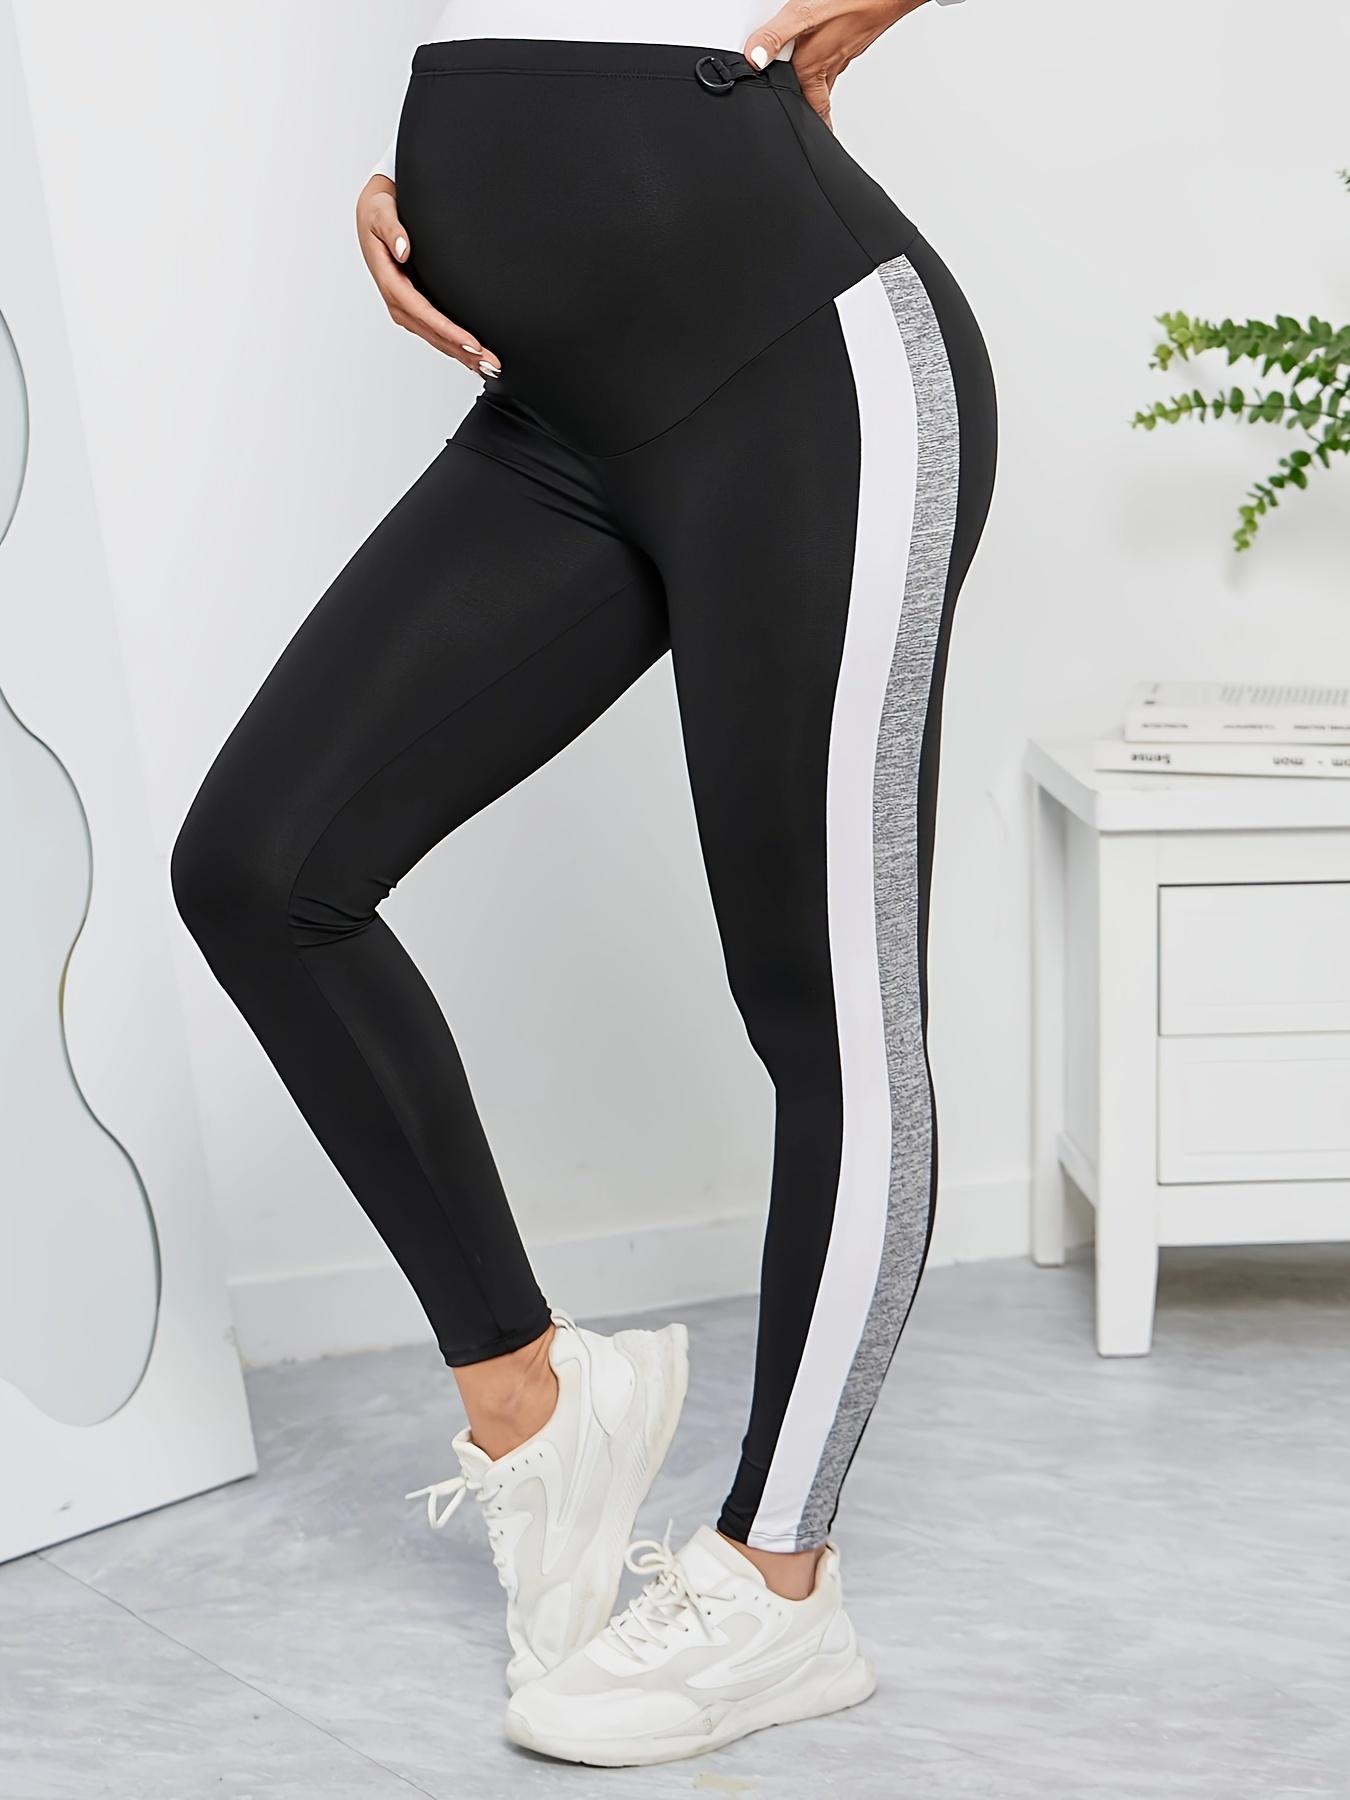 SHEIN Maternity Solid Belly Support Leggings